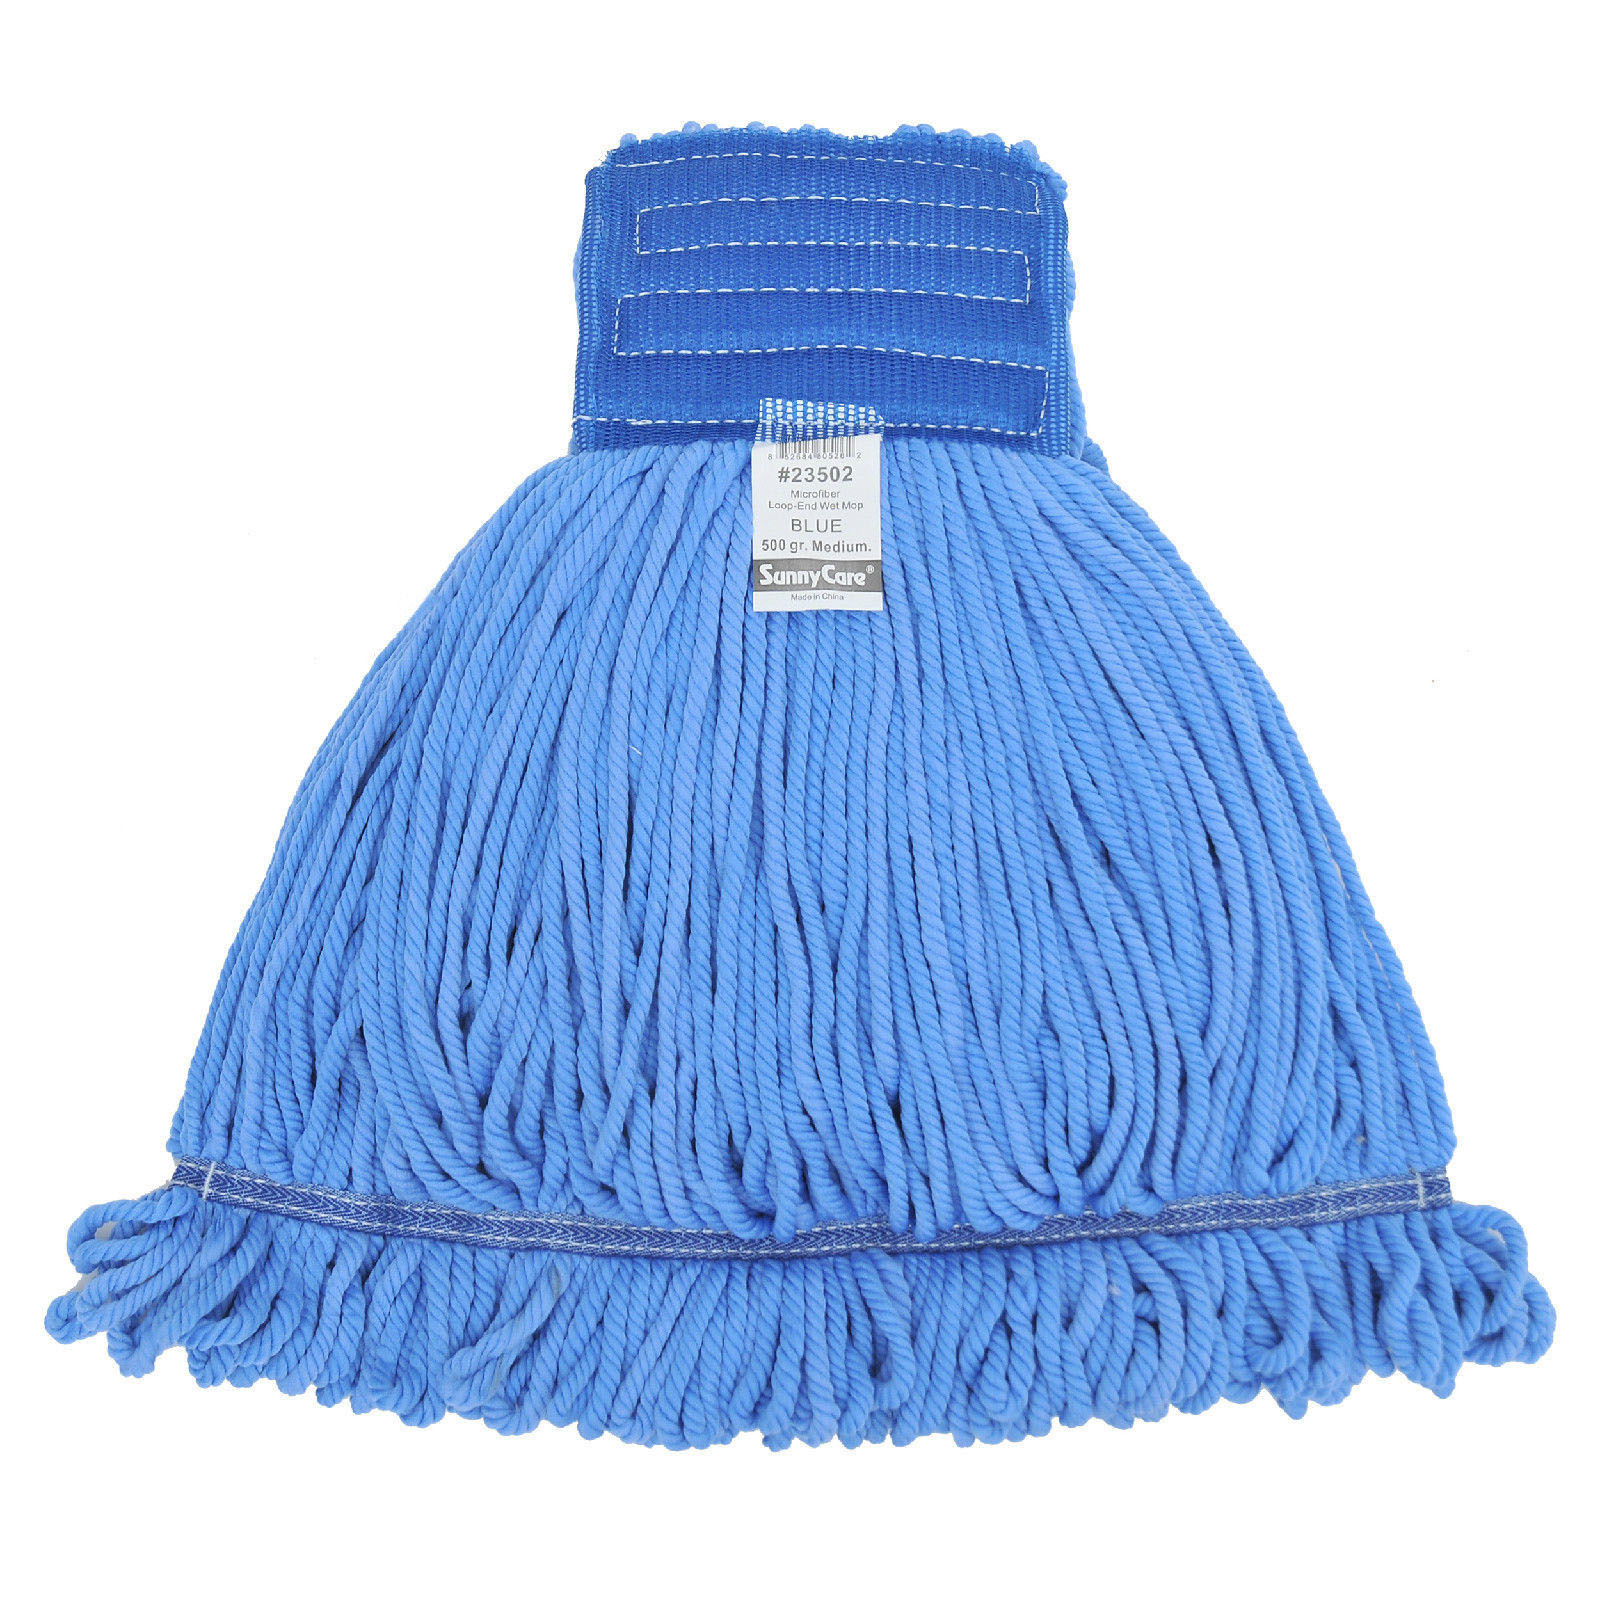 1pc 680g/24oz SunnyCare #22682-1pc Blue Synthetic Cotton Loop-End Wet Mops 